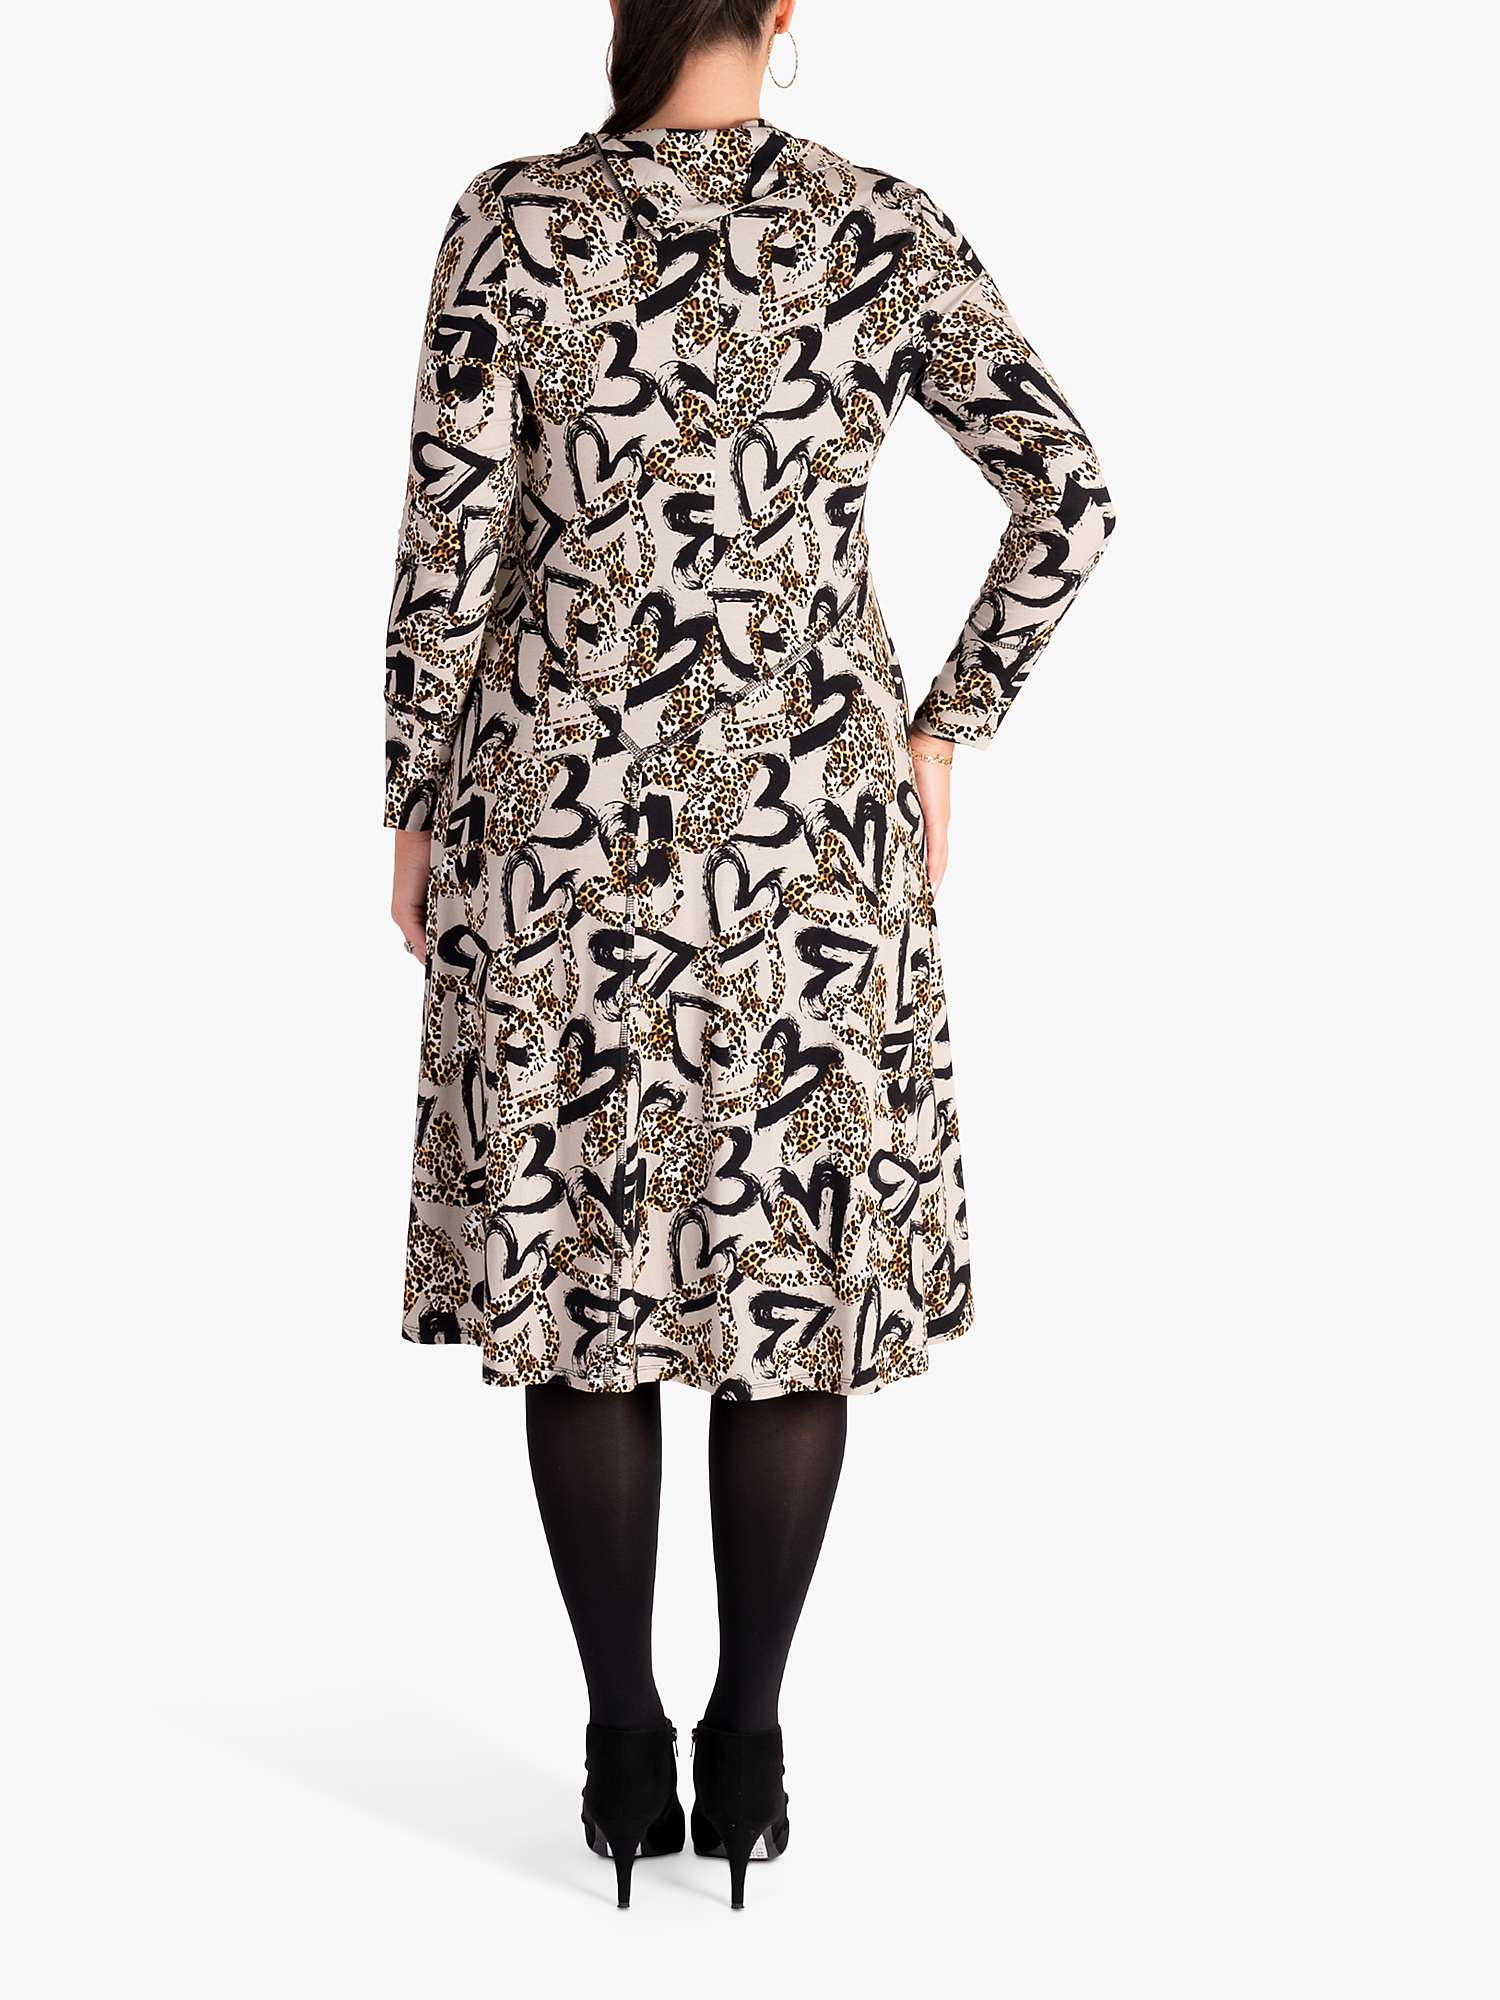 Buy chesca Heart Print Dress, Stone/Leopard Online at johnlewis.com